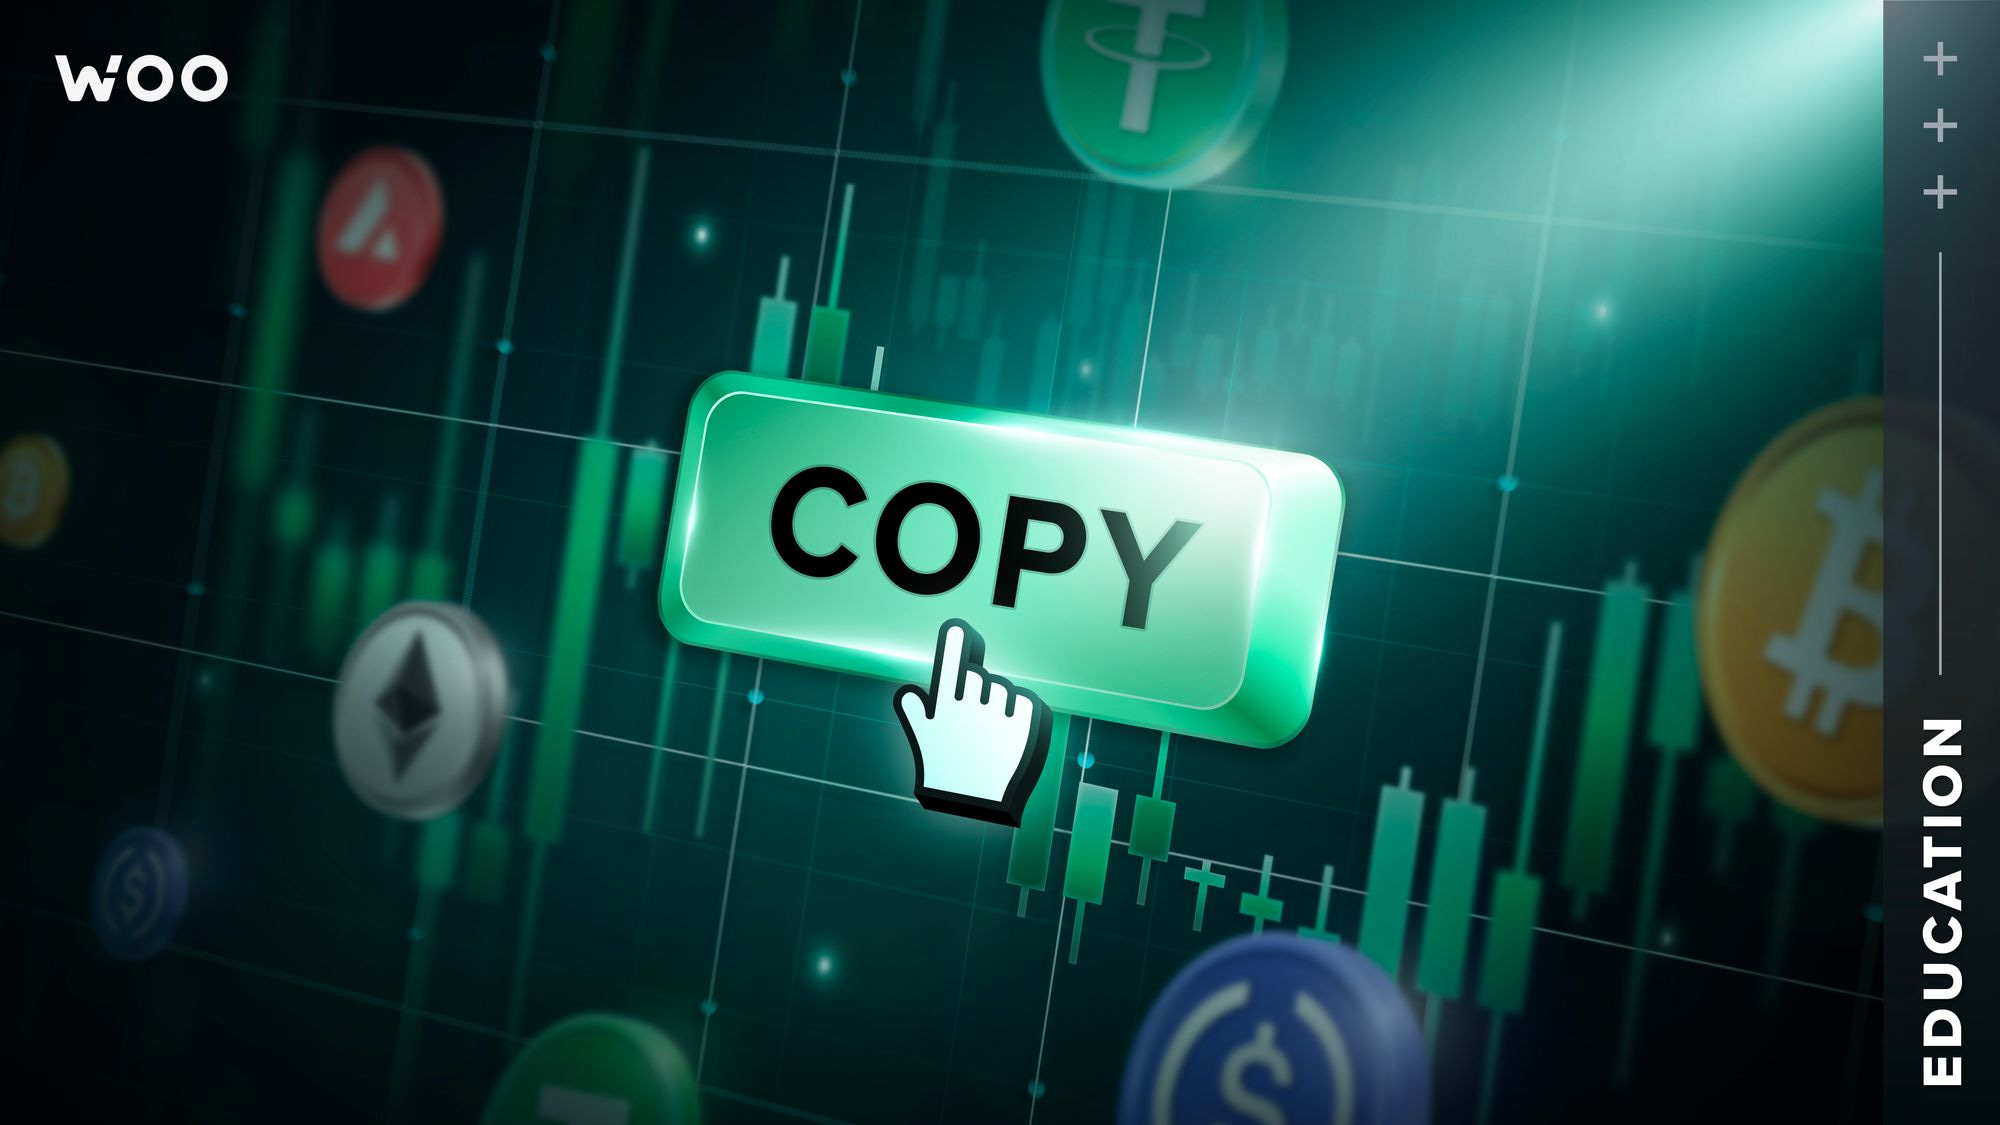 Copy trading will not give you financial freedom, it will bankrupt you.